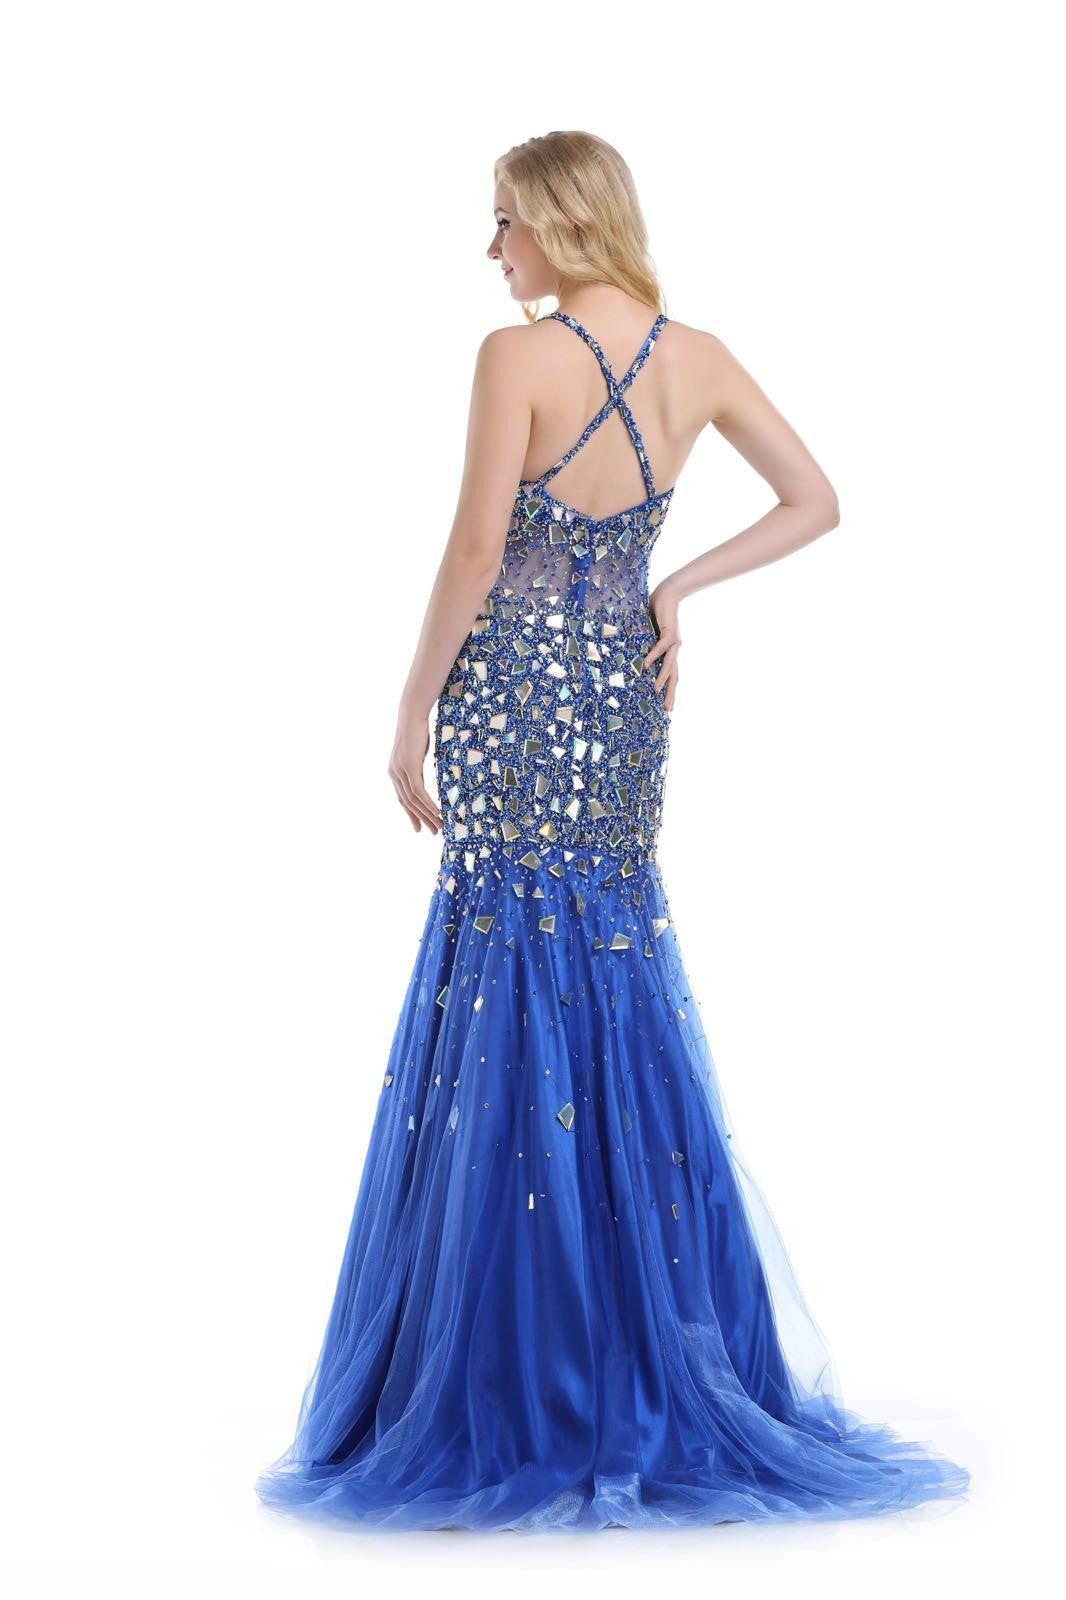 Dazzling Rhinestone Fit and Flare Gown